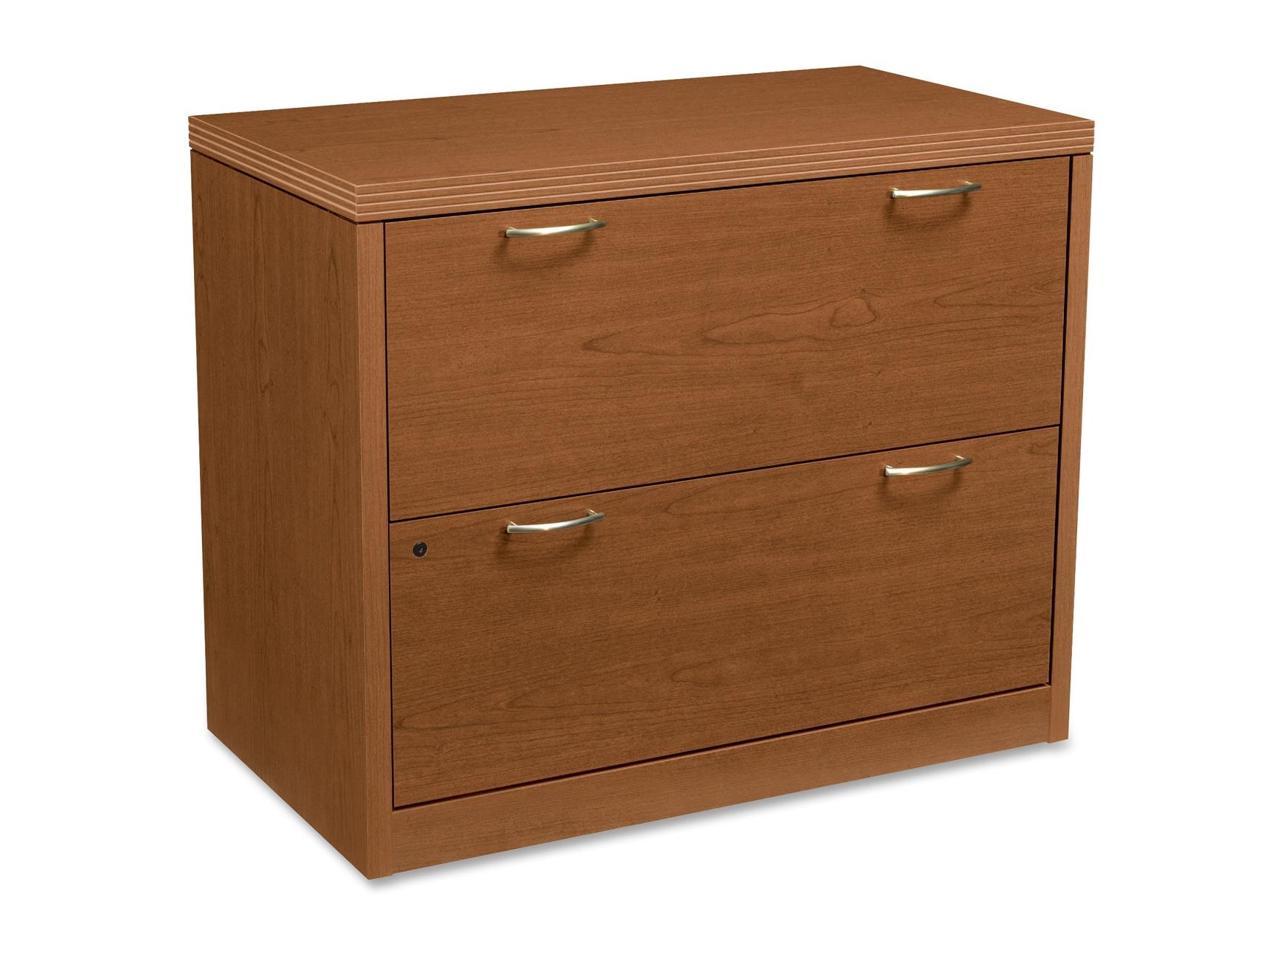 HON Valido 2-Drawer Lateral File, 36"W - image 3 of 11